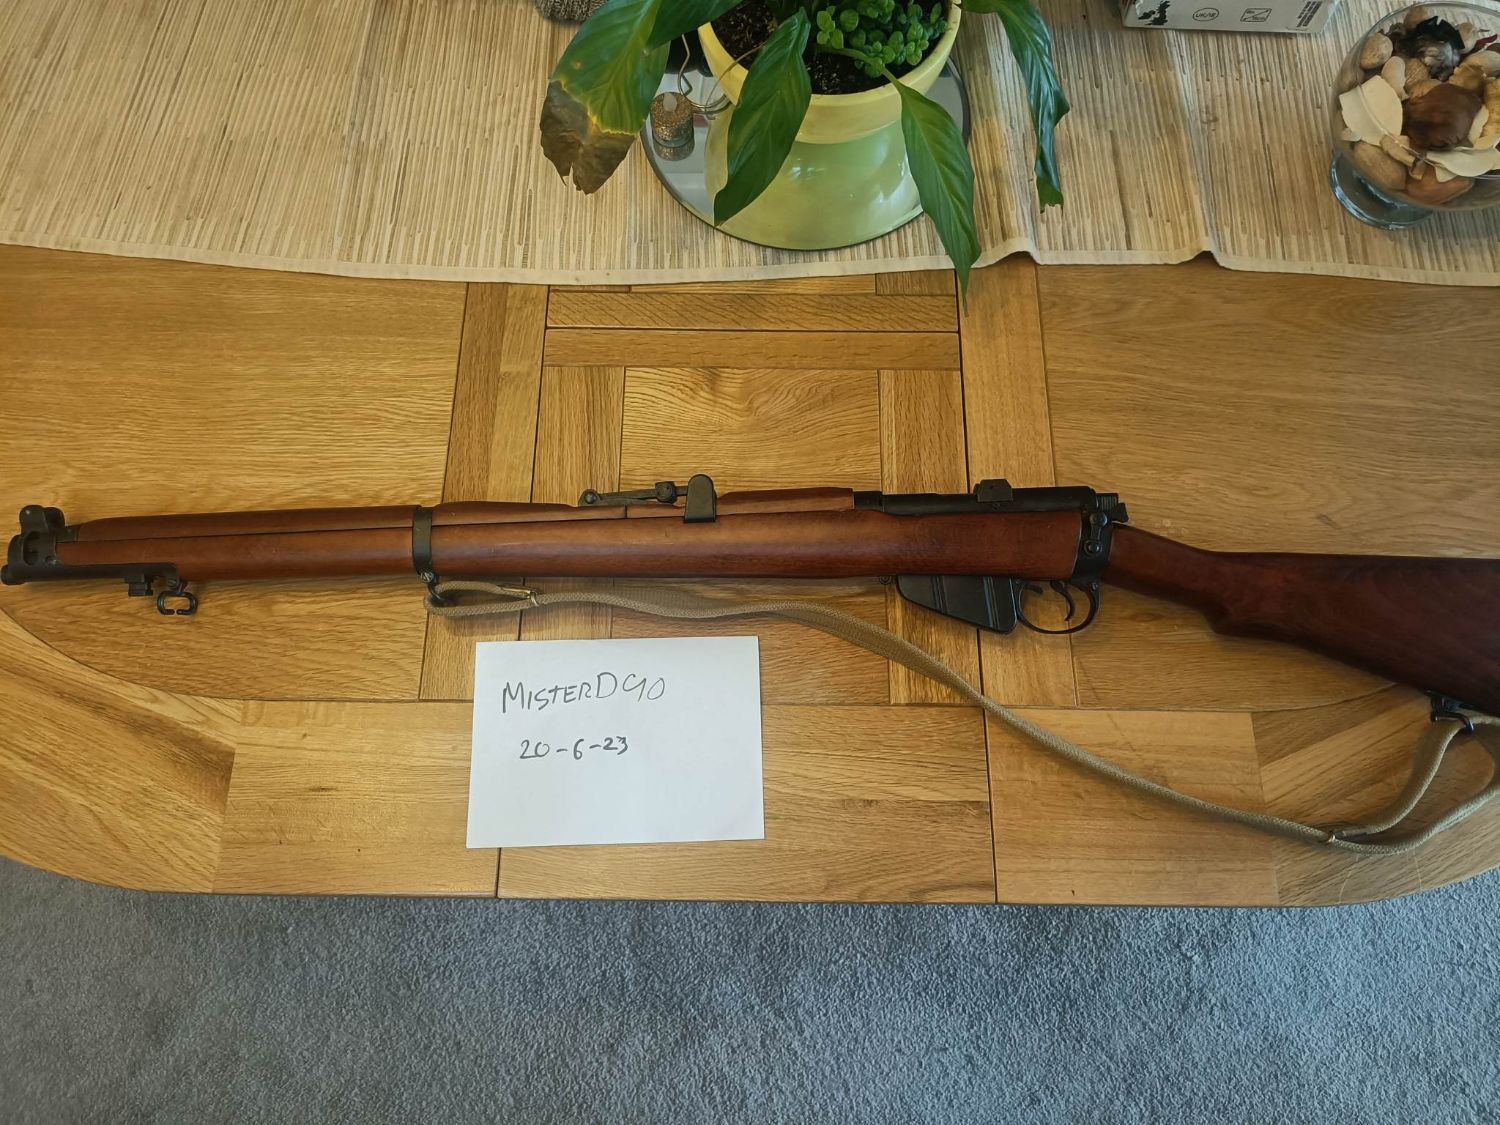 S&T - Airsoft Lee Enfield Rifle No.1 MK.III Bolt Action Rifle